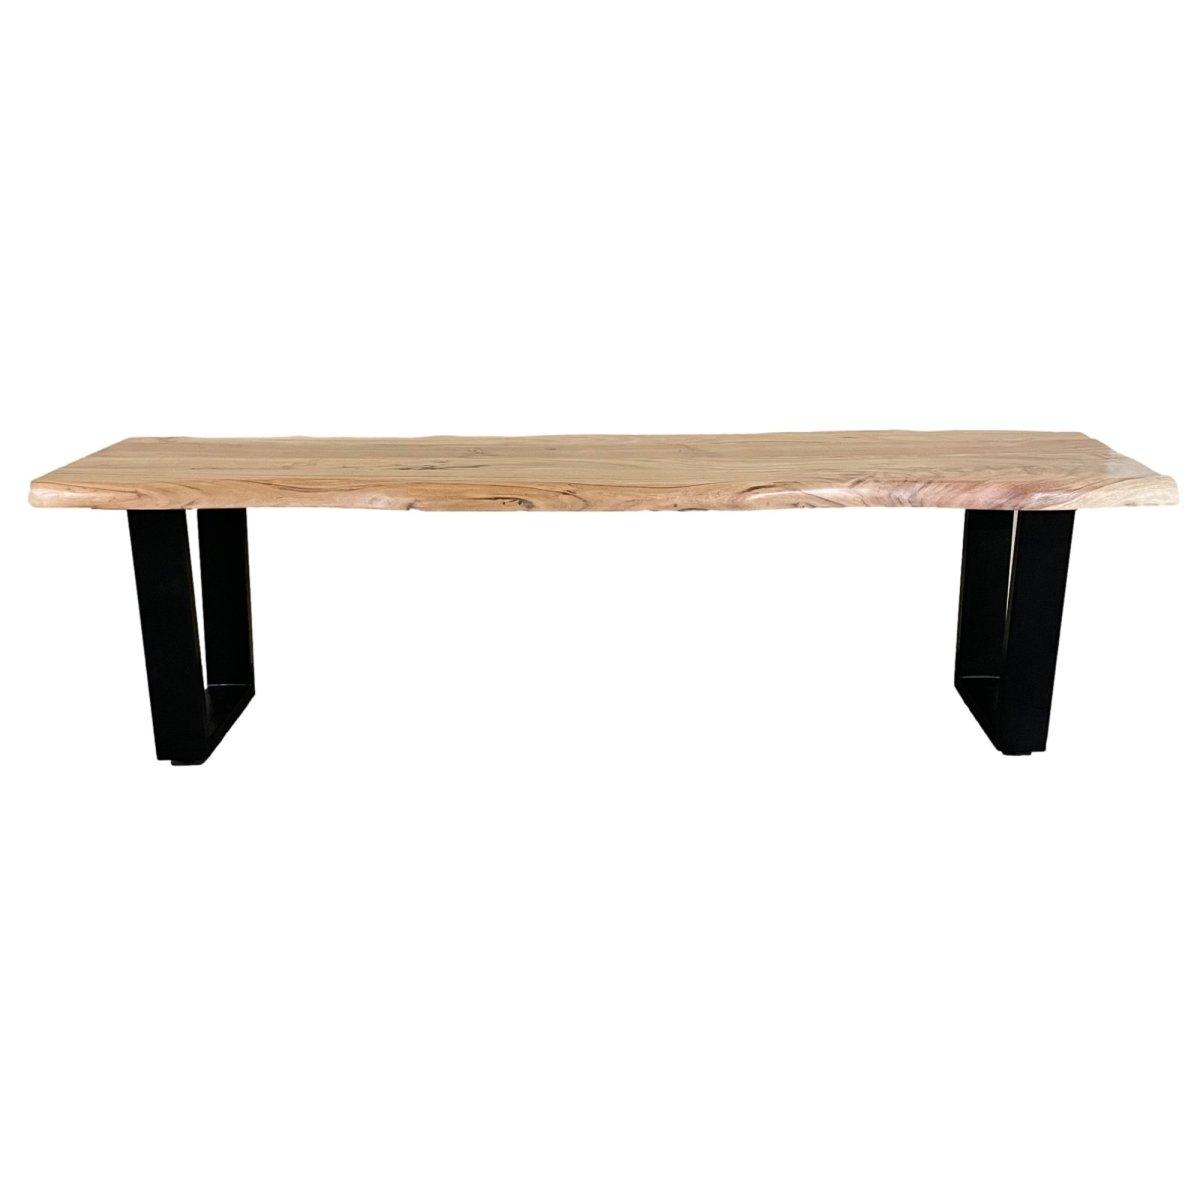 63 inch Fuji Live edge acacia dining bench - Rustic Furniture Outlet